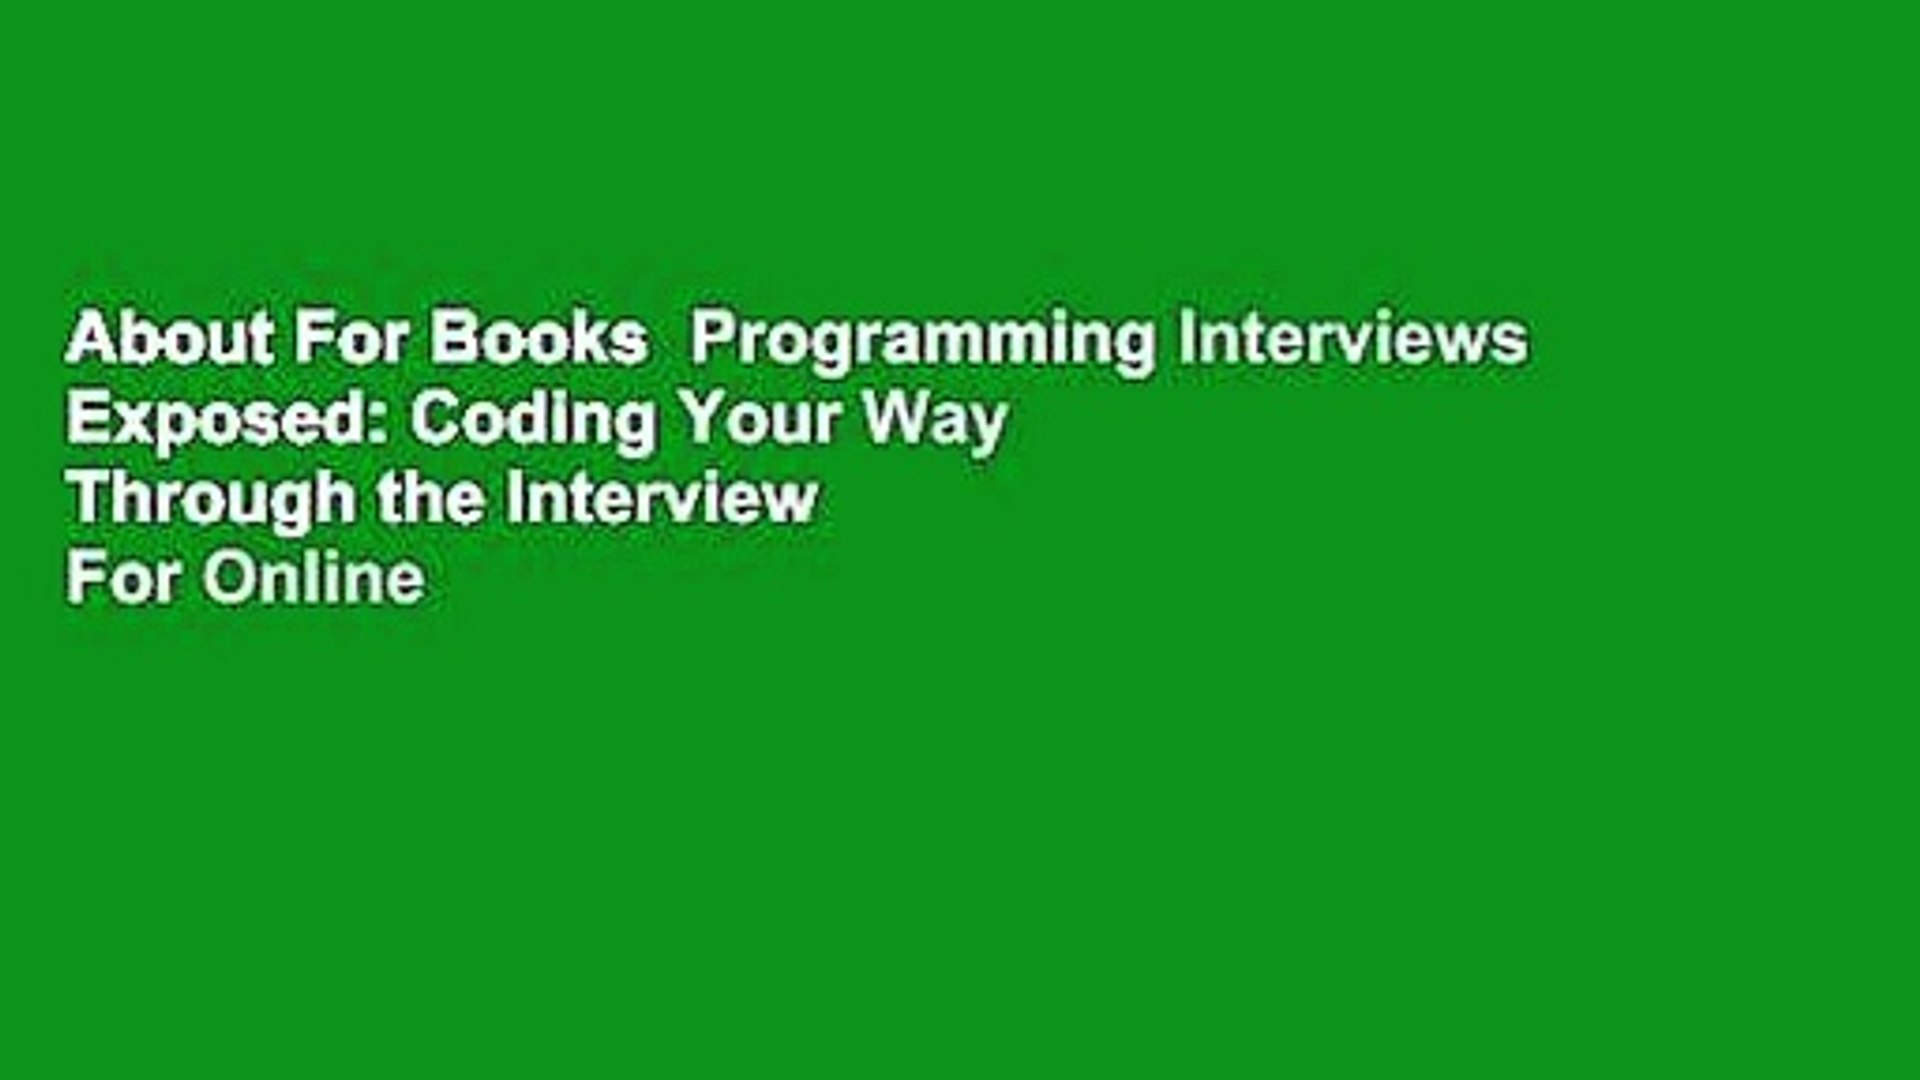 About For Books  Programming Interviews Exposed: Coding Your Way Through the Interview  For Online